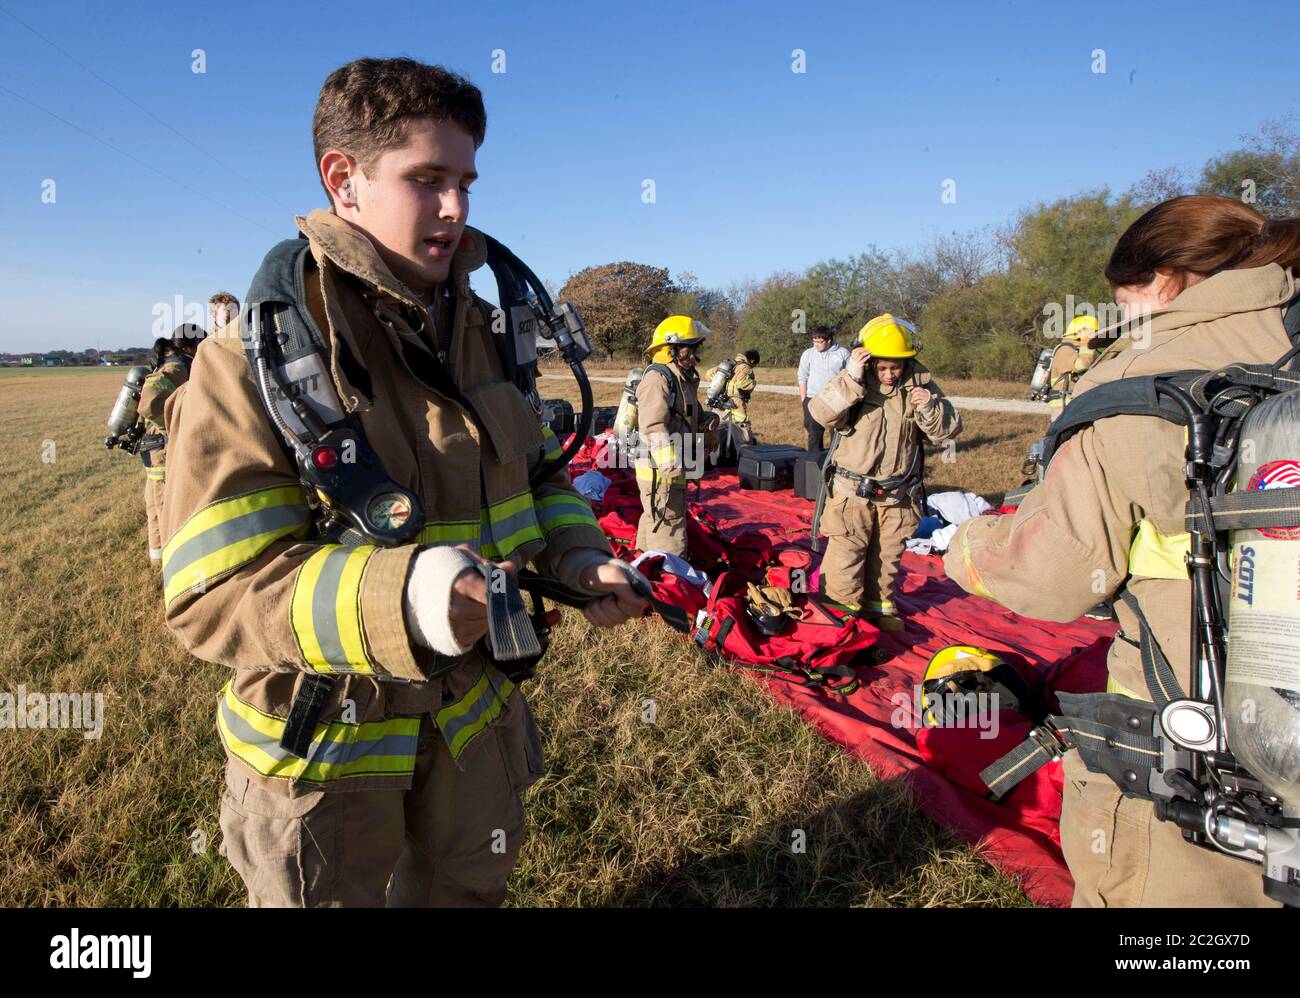 Austin Texas USA, February 4 2014: Students from the LBJ High School Fire Training Academy wearing turnout gear prepare for a training exercise.  Students graduating from the two-year program will be eligible for emergency medical technician EMT certification and possess advanced fire fighting skills. ©Bob Daemmrich Stock Photo